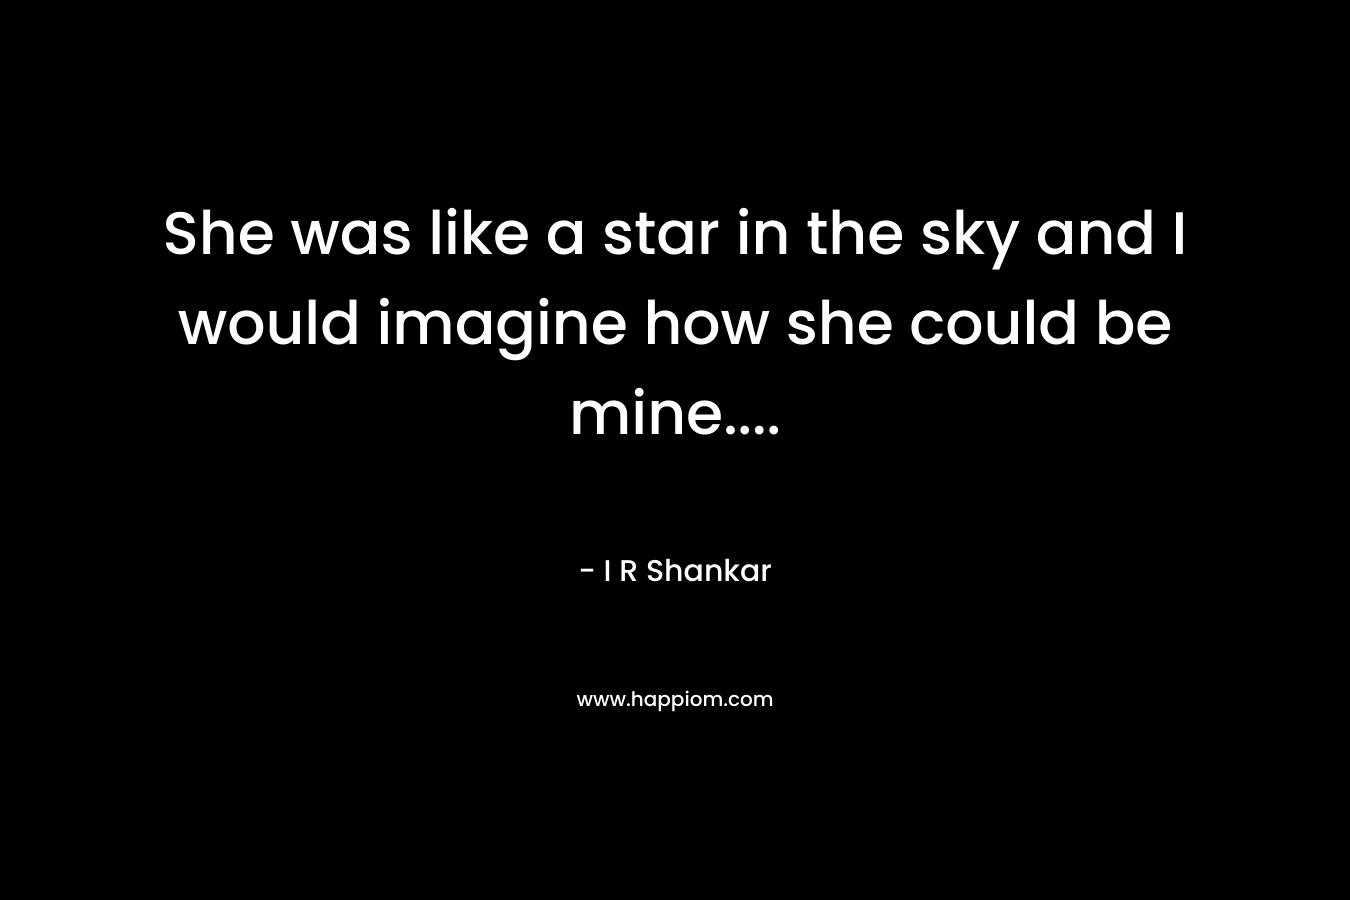 She was like a star in the sky and I would imagine how she could be mine…. – I R Shankar